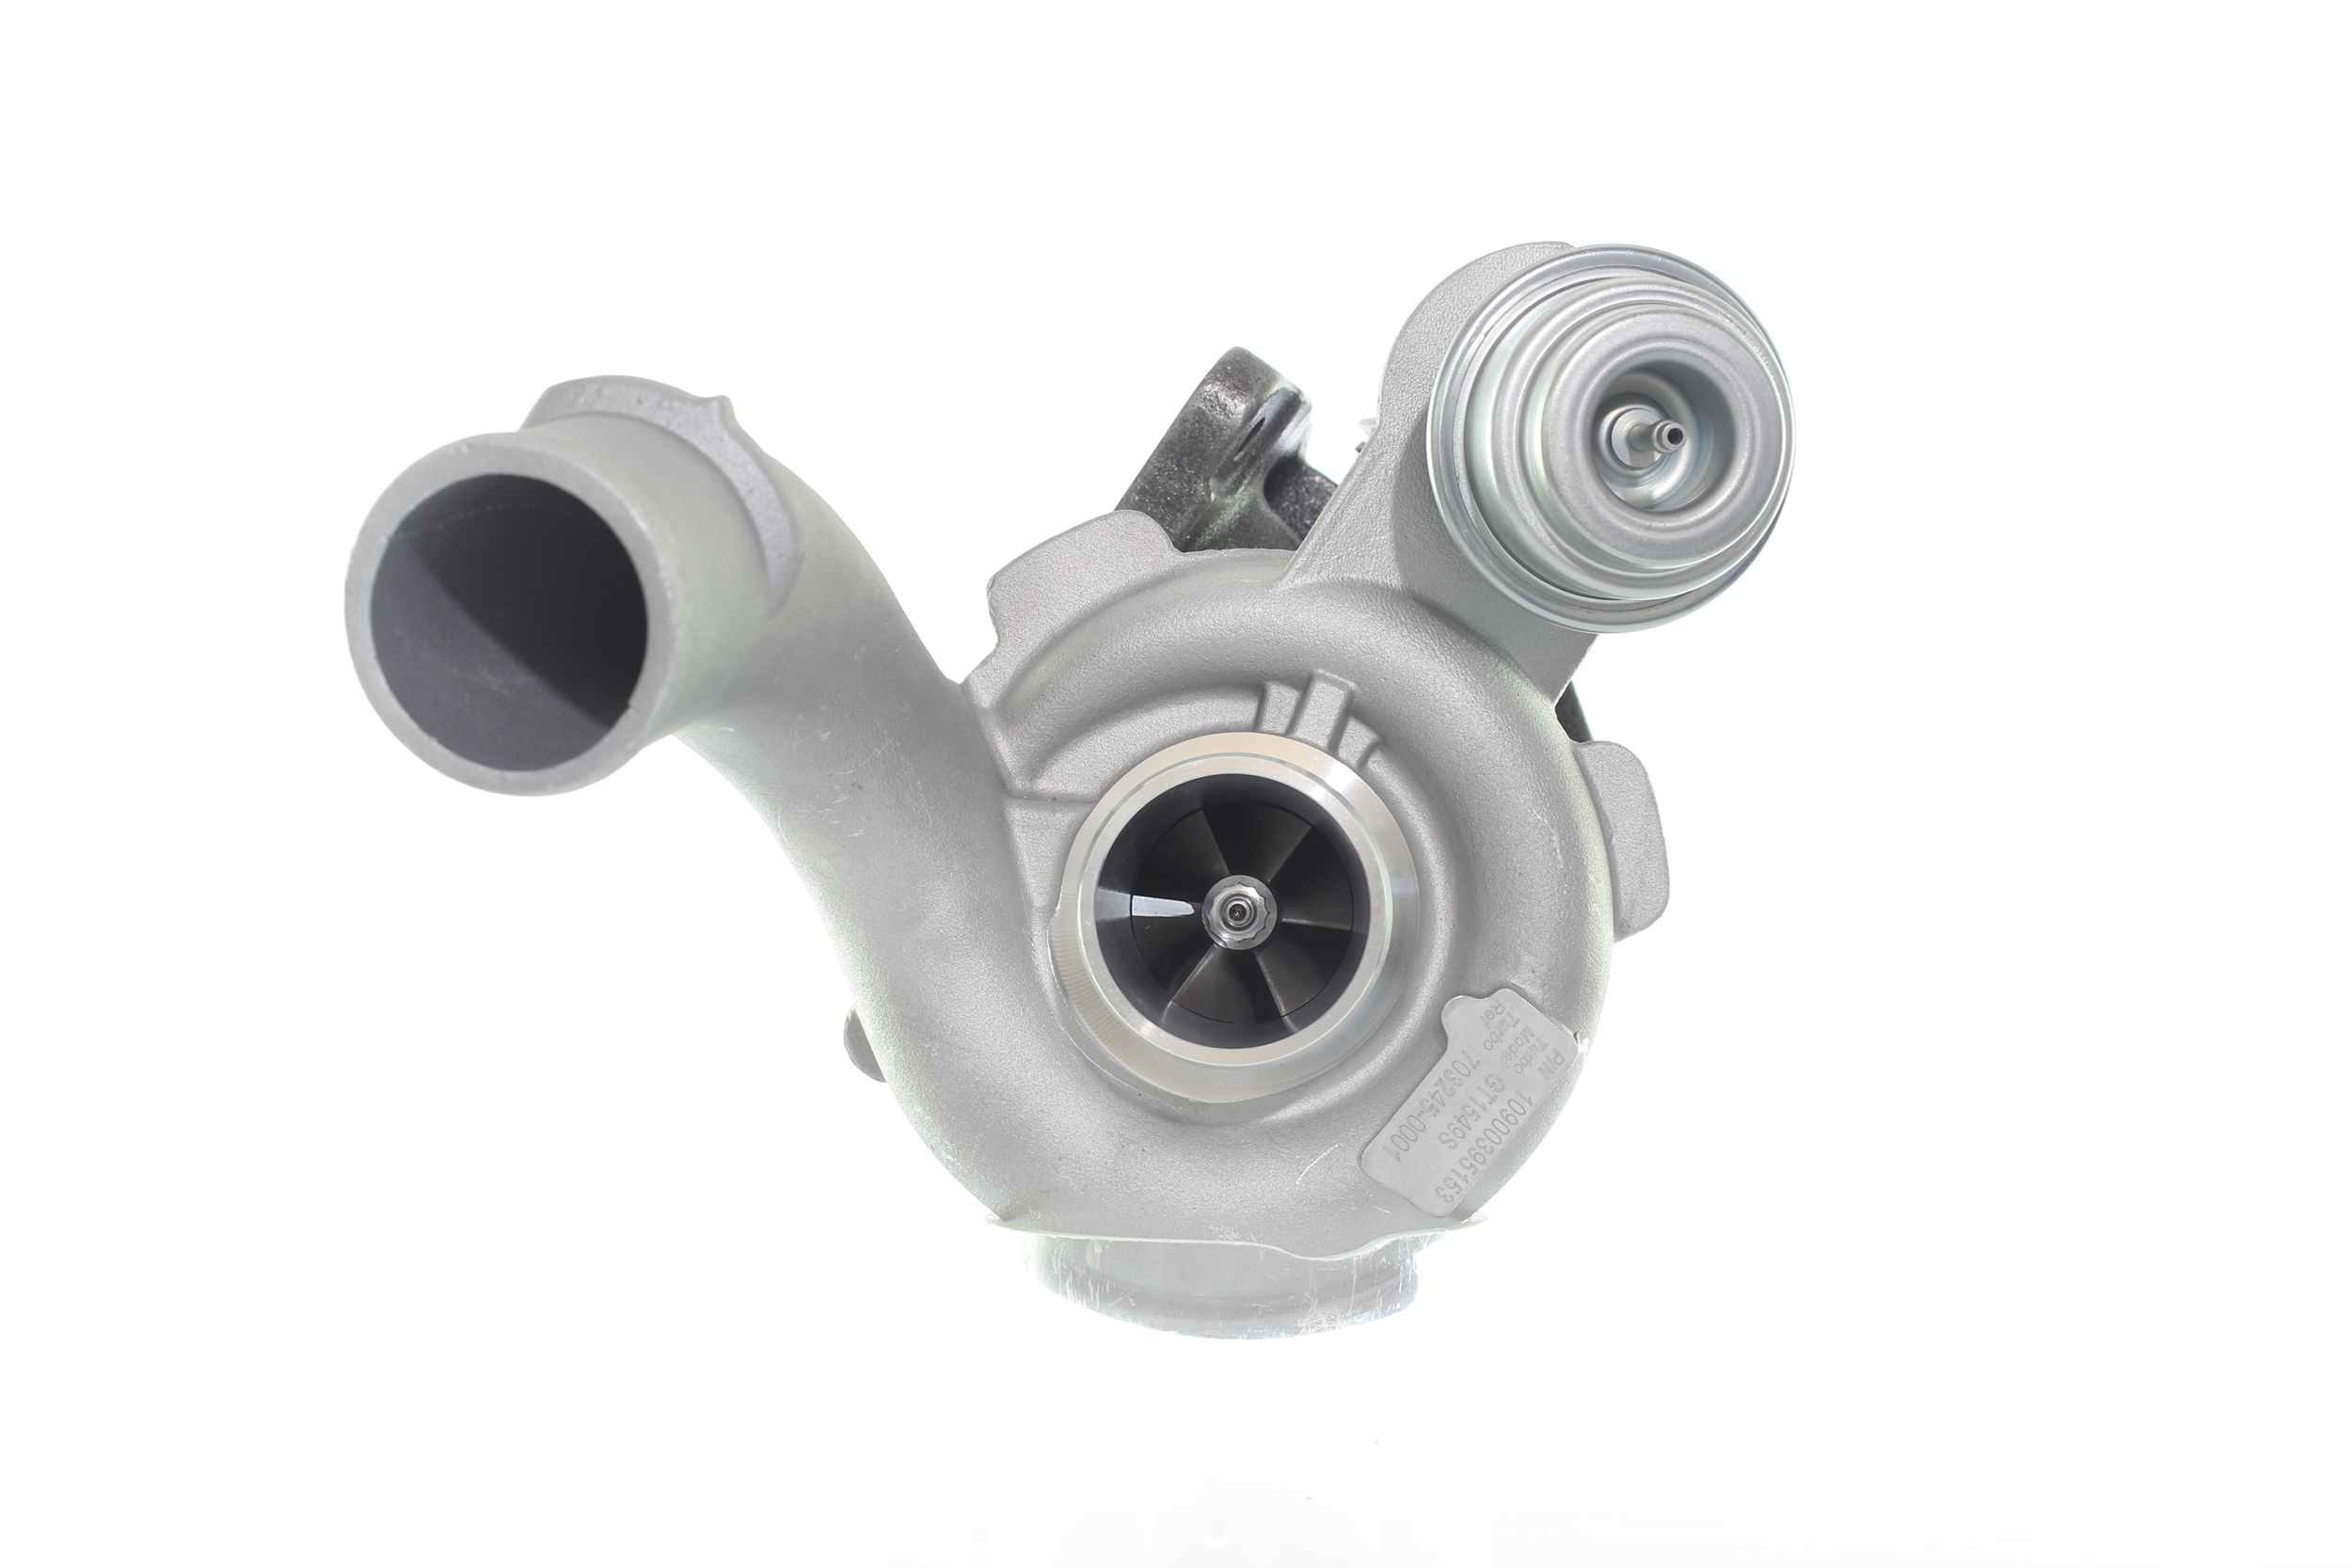 ALANKO 10900395 Turbocharger Exhaust Turbocharger, Incl. Gasket Set, with attachment material